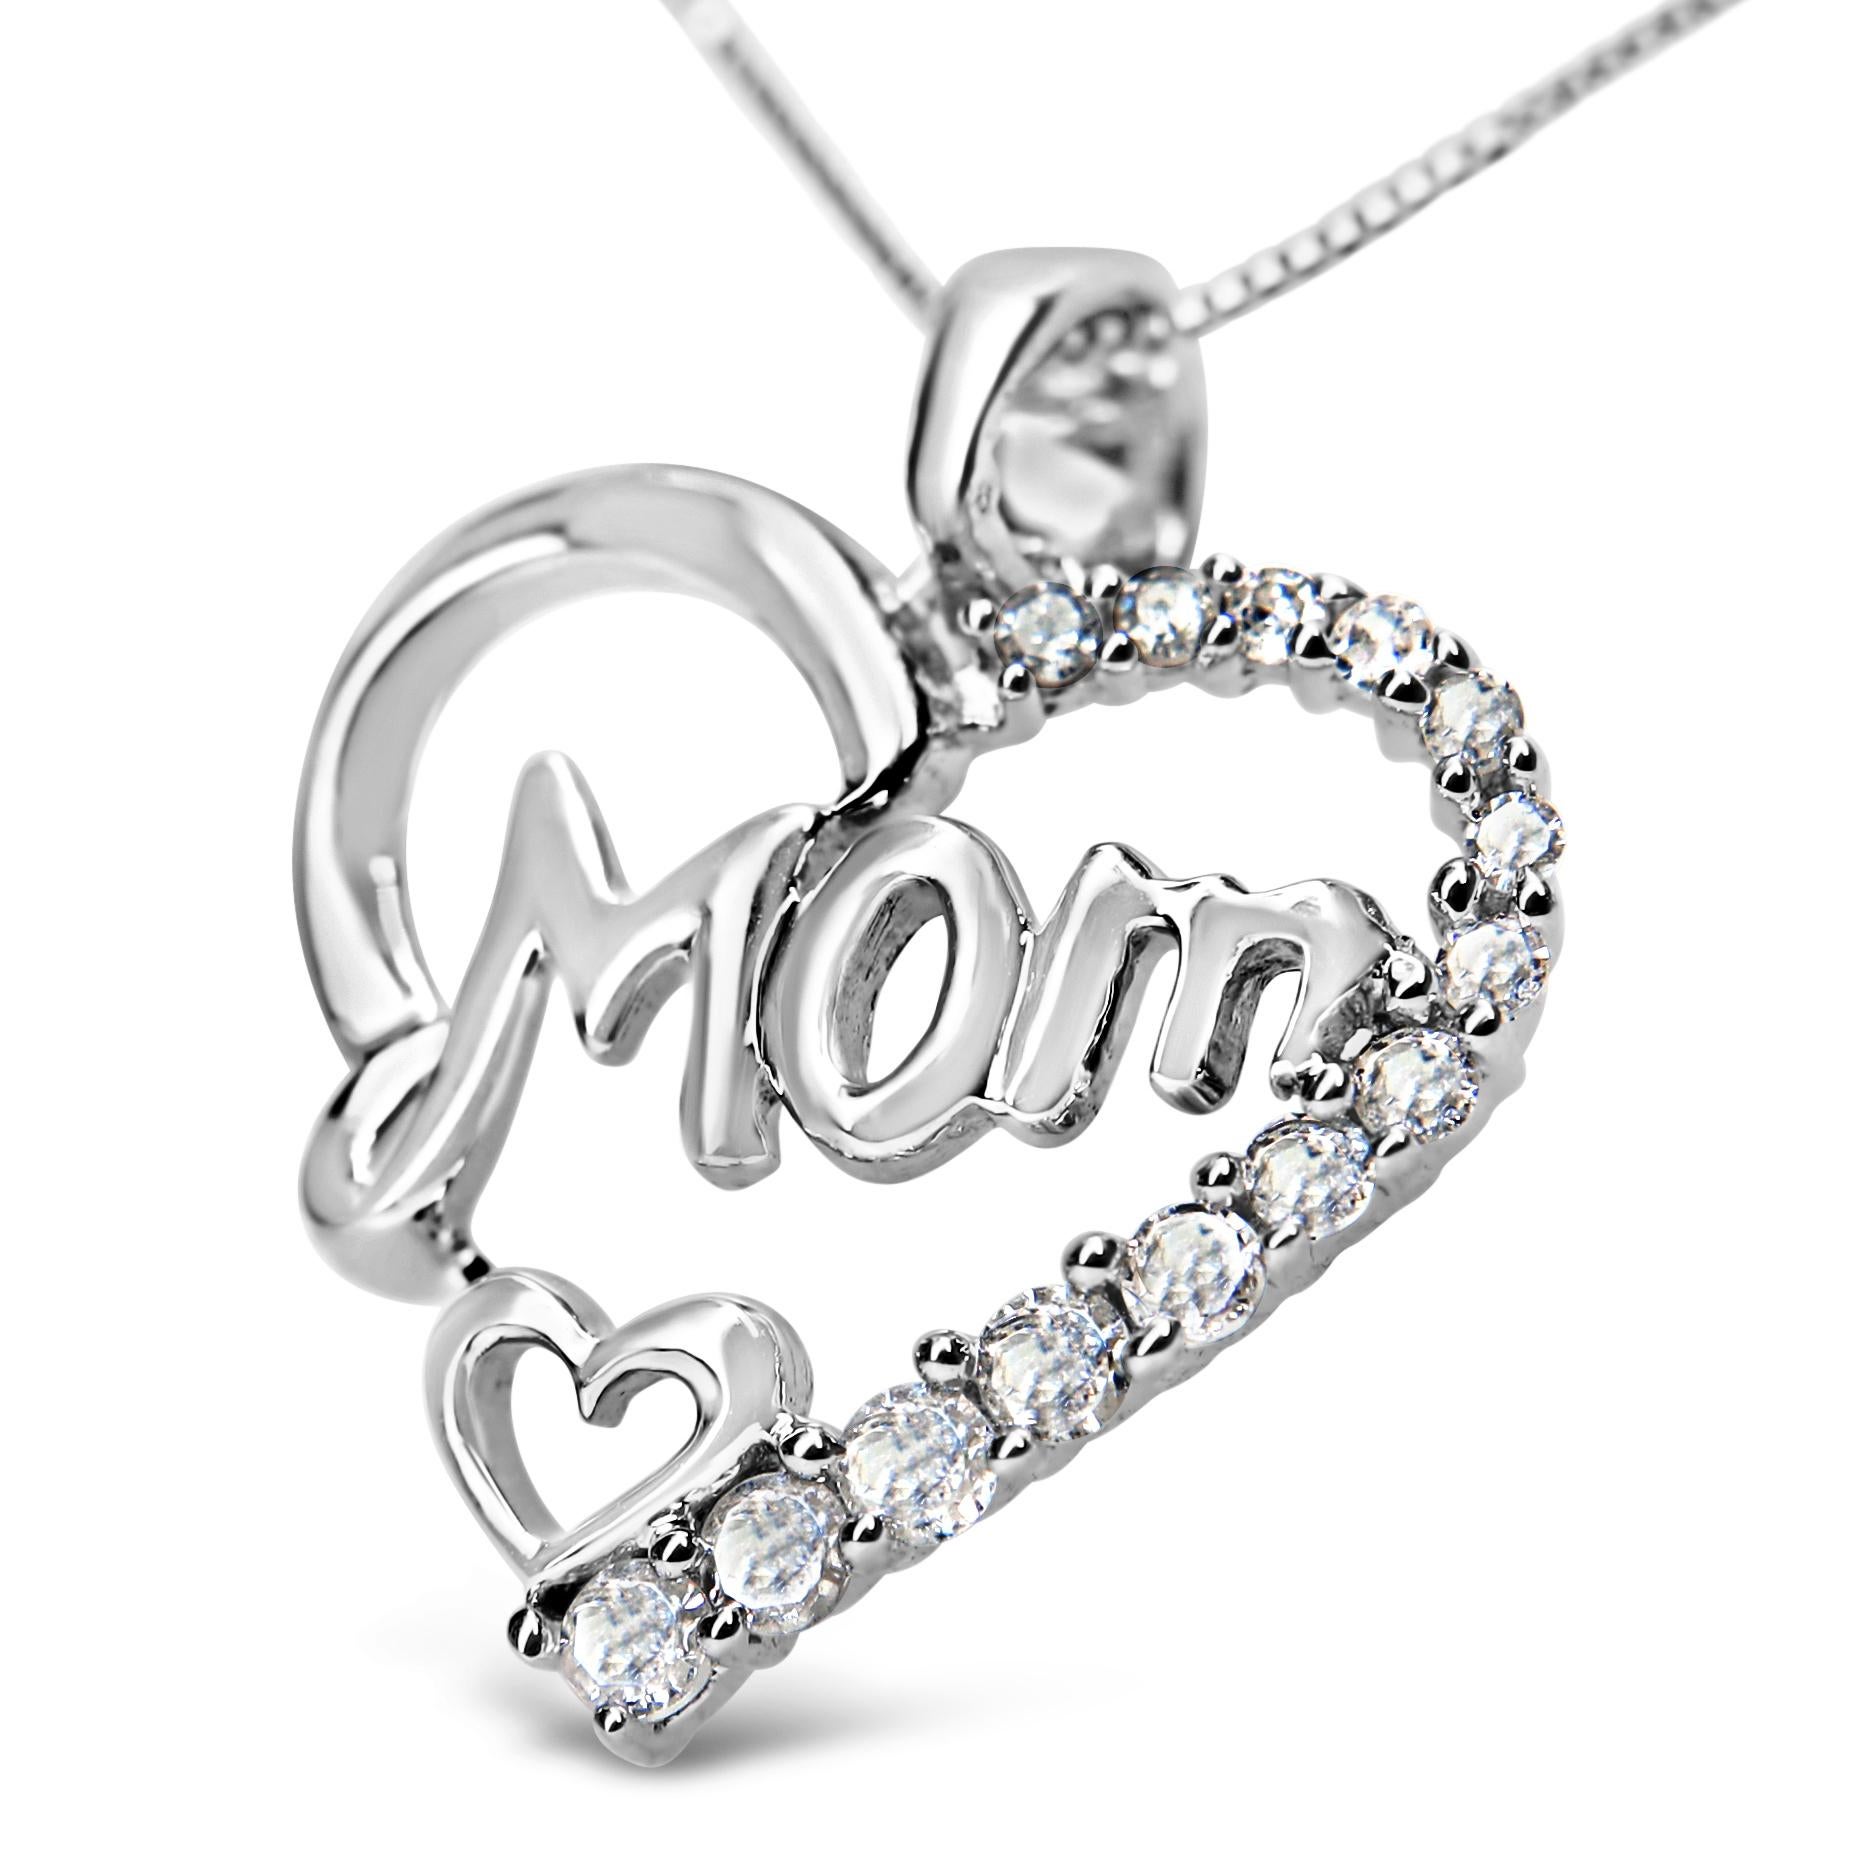 Give mom the gift of diamonds to show your appreciation for all that she has done and for all the ways you love her. This charming heart pendant is crafted from .925 Sterling Silver and features an open design with the word 